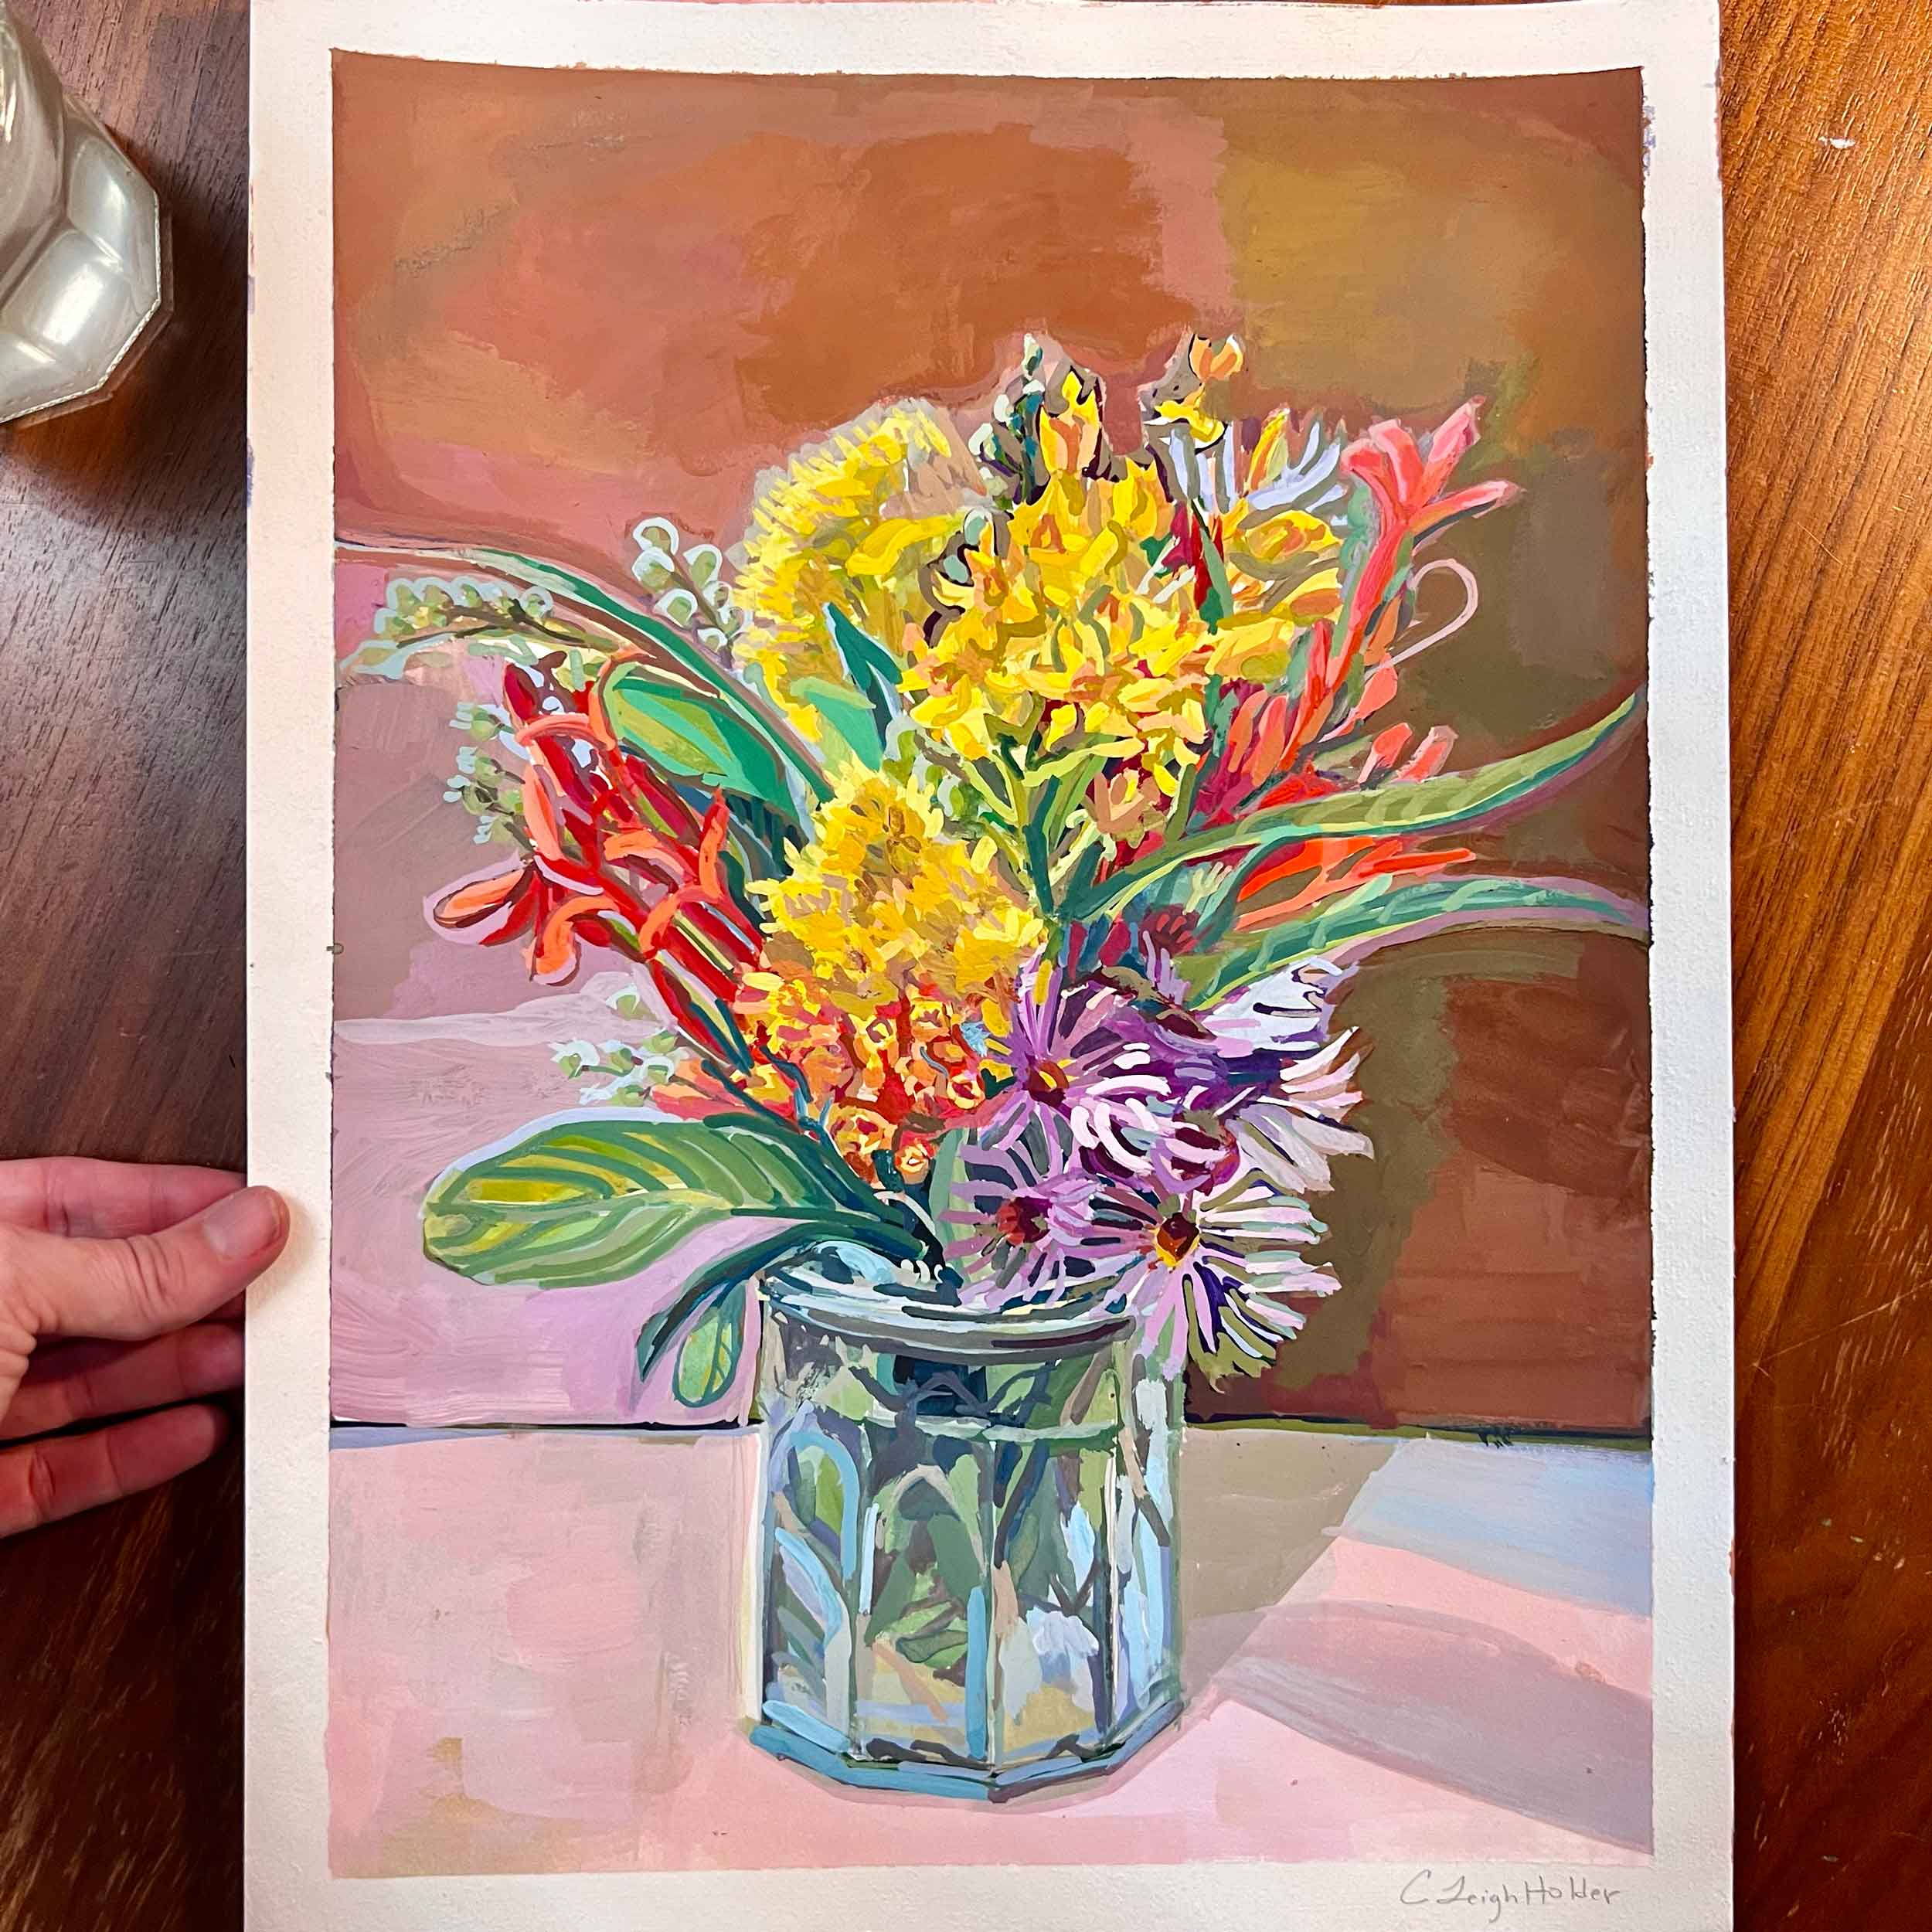 Wildflowers-Painting_gouache_original painting_with purple_-yellow_-red-flowers-in-blue_glass_vintage_style_painting_blush pink-on-paper_Texas-artist-Courtney-Holder